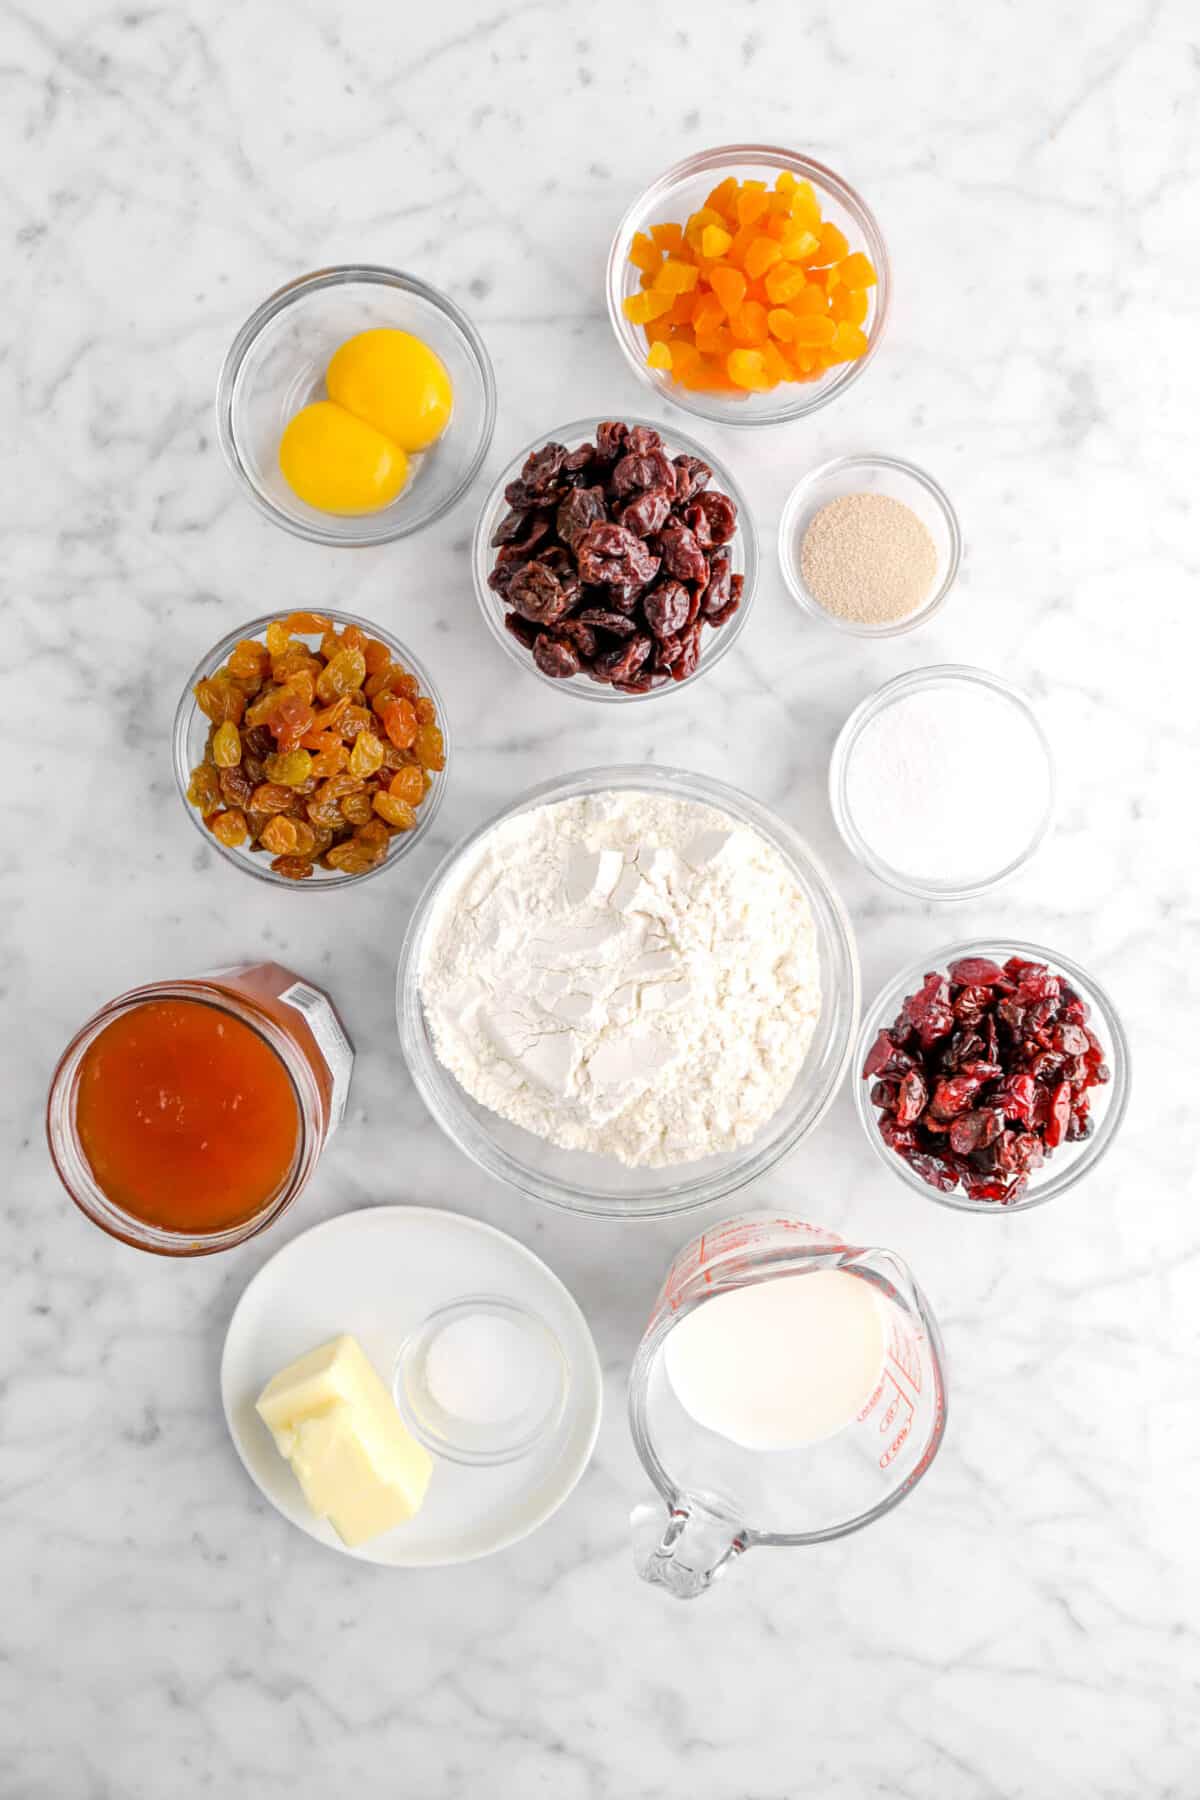 chopped apricot, two egg yolks, dried cranberries, dried golden raisins, yeast, sugar, dried cranberries, flour, apricot jam, butter, salt, and milk on marble counter